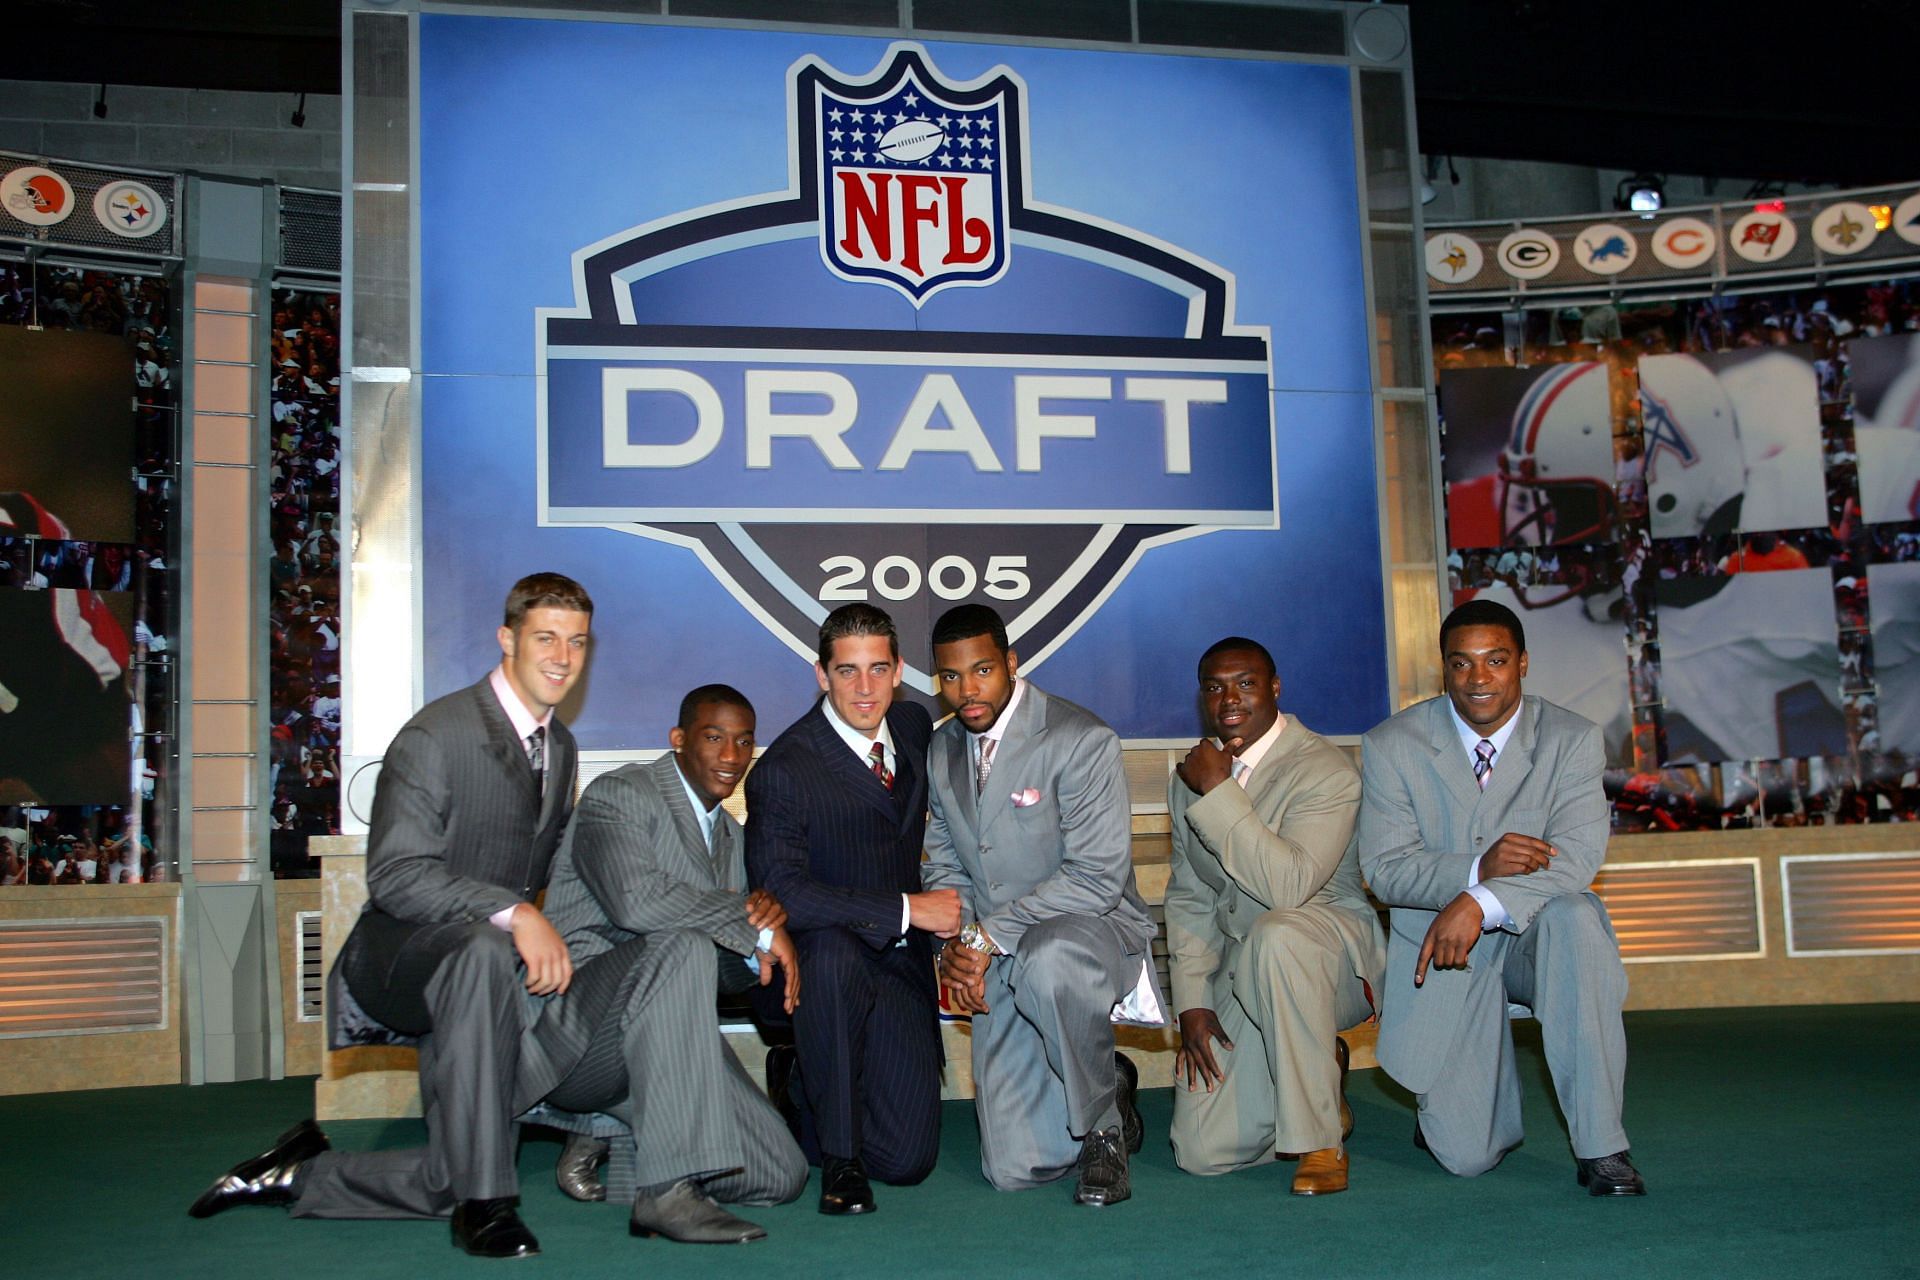 70th NFL Draft which included several key names